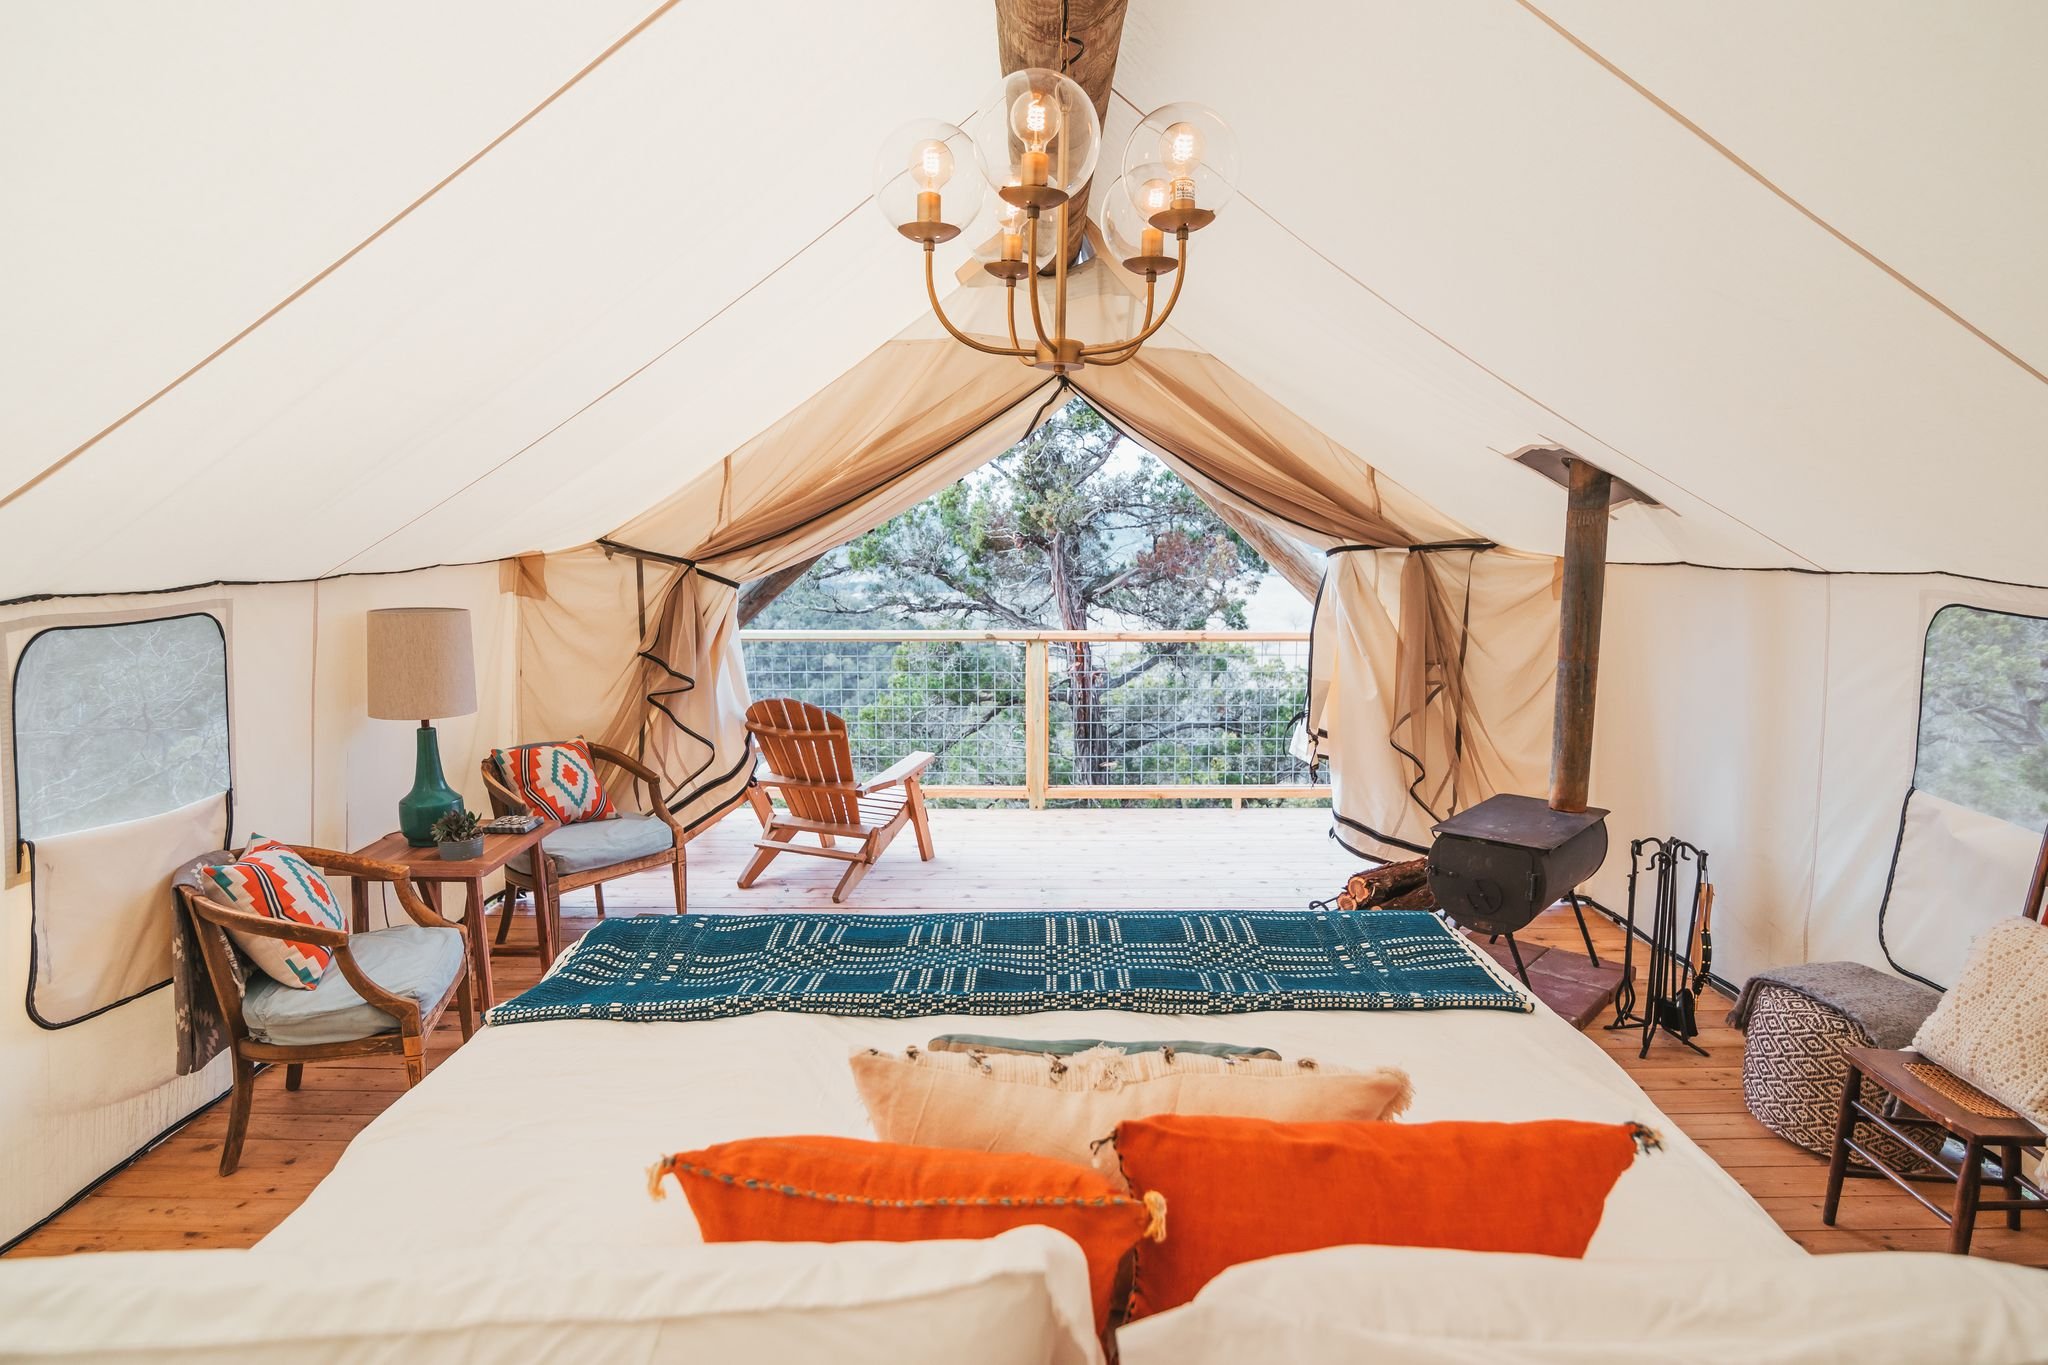 Not the camping type? Here’s what you need to know about a glamping trip.